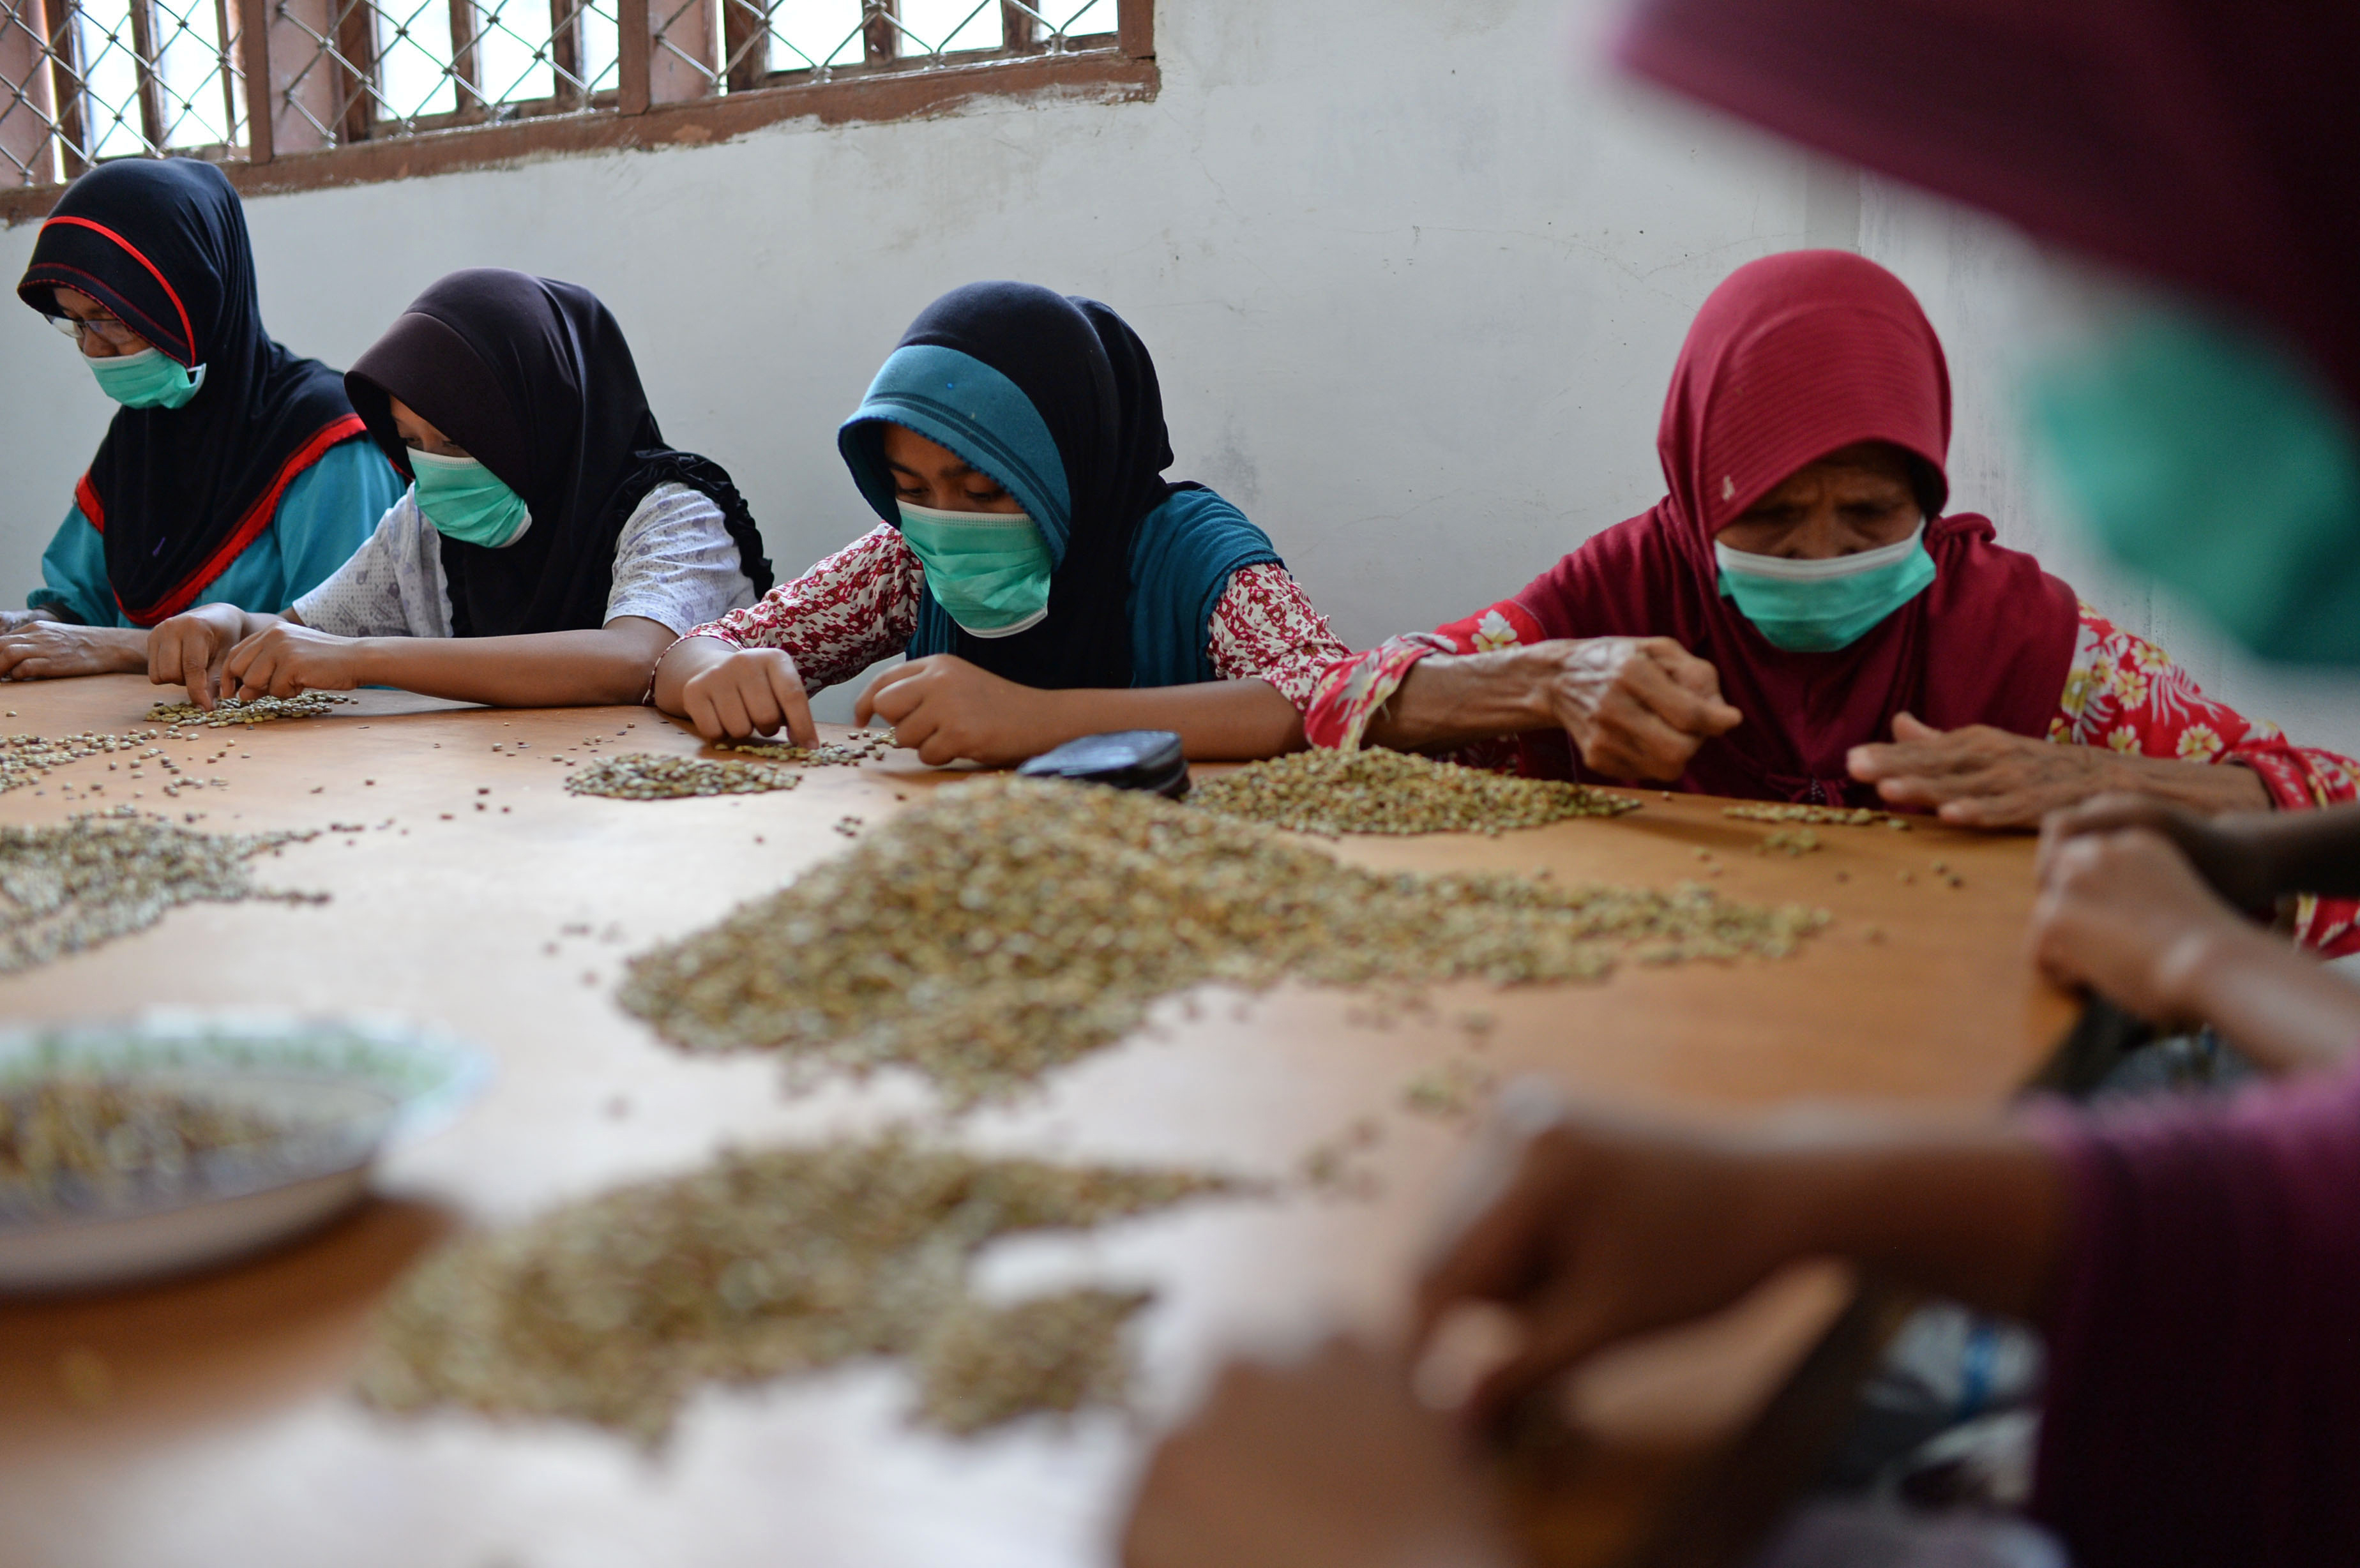 Employees inspect Arabica coffee beans at the Solok Radjo Cooperative coffee farm in Alahan Panjang, West Sumatra, Indonesia, on Friday, July 15, 2016. Coffee production in Indonesia will probably drop 10 percent this year after dry weather caused by the worst El Nino in almost two decades damaged some crops and delayed the harvest. (Dimas Ardian/Bloomberg via Getty Images)